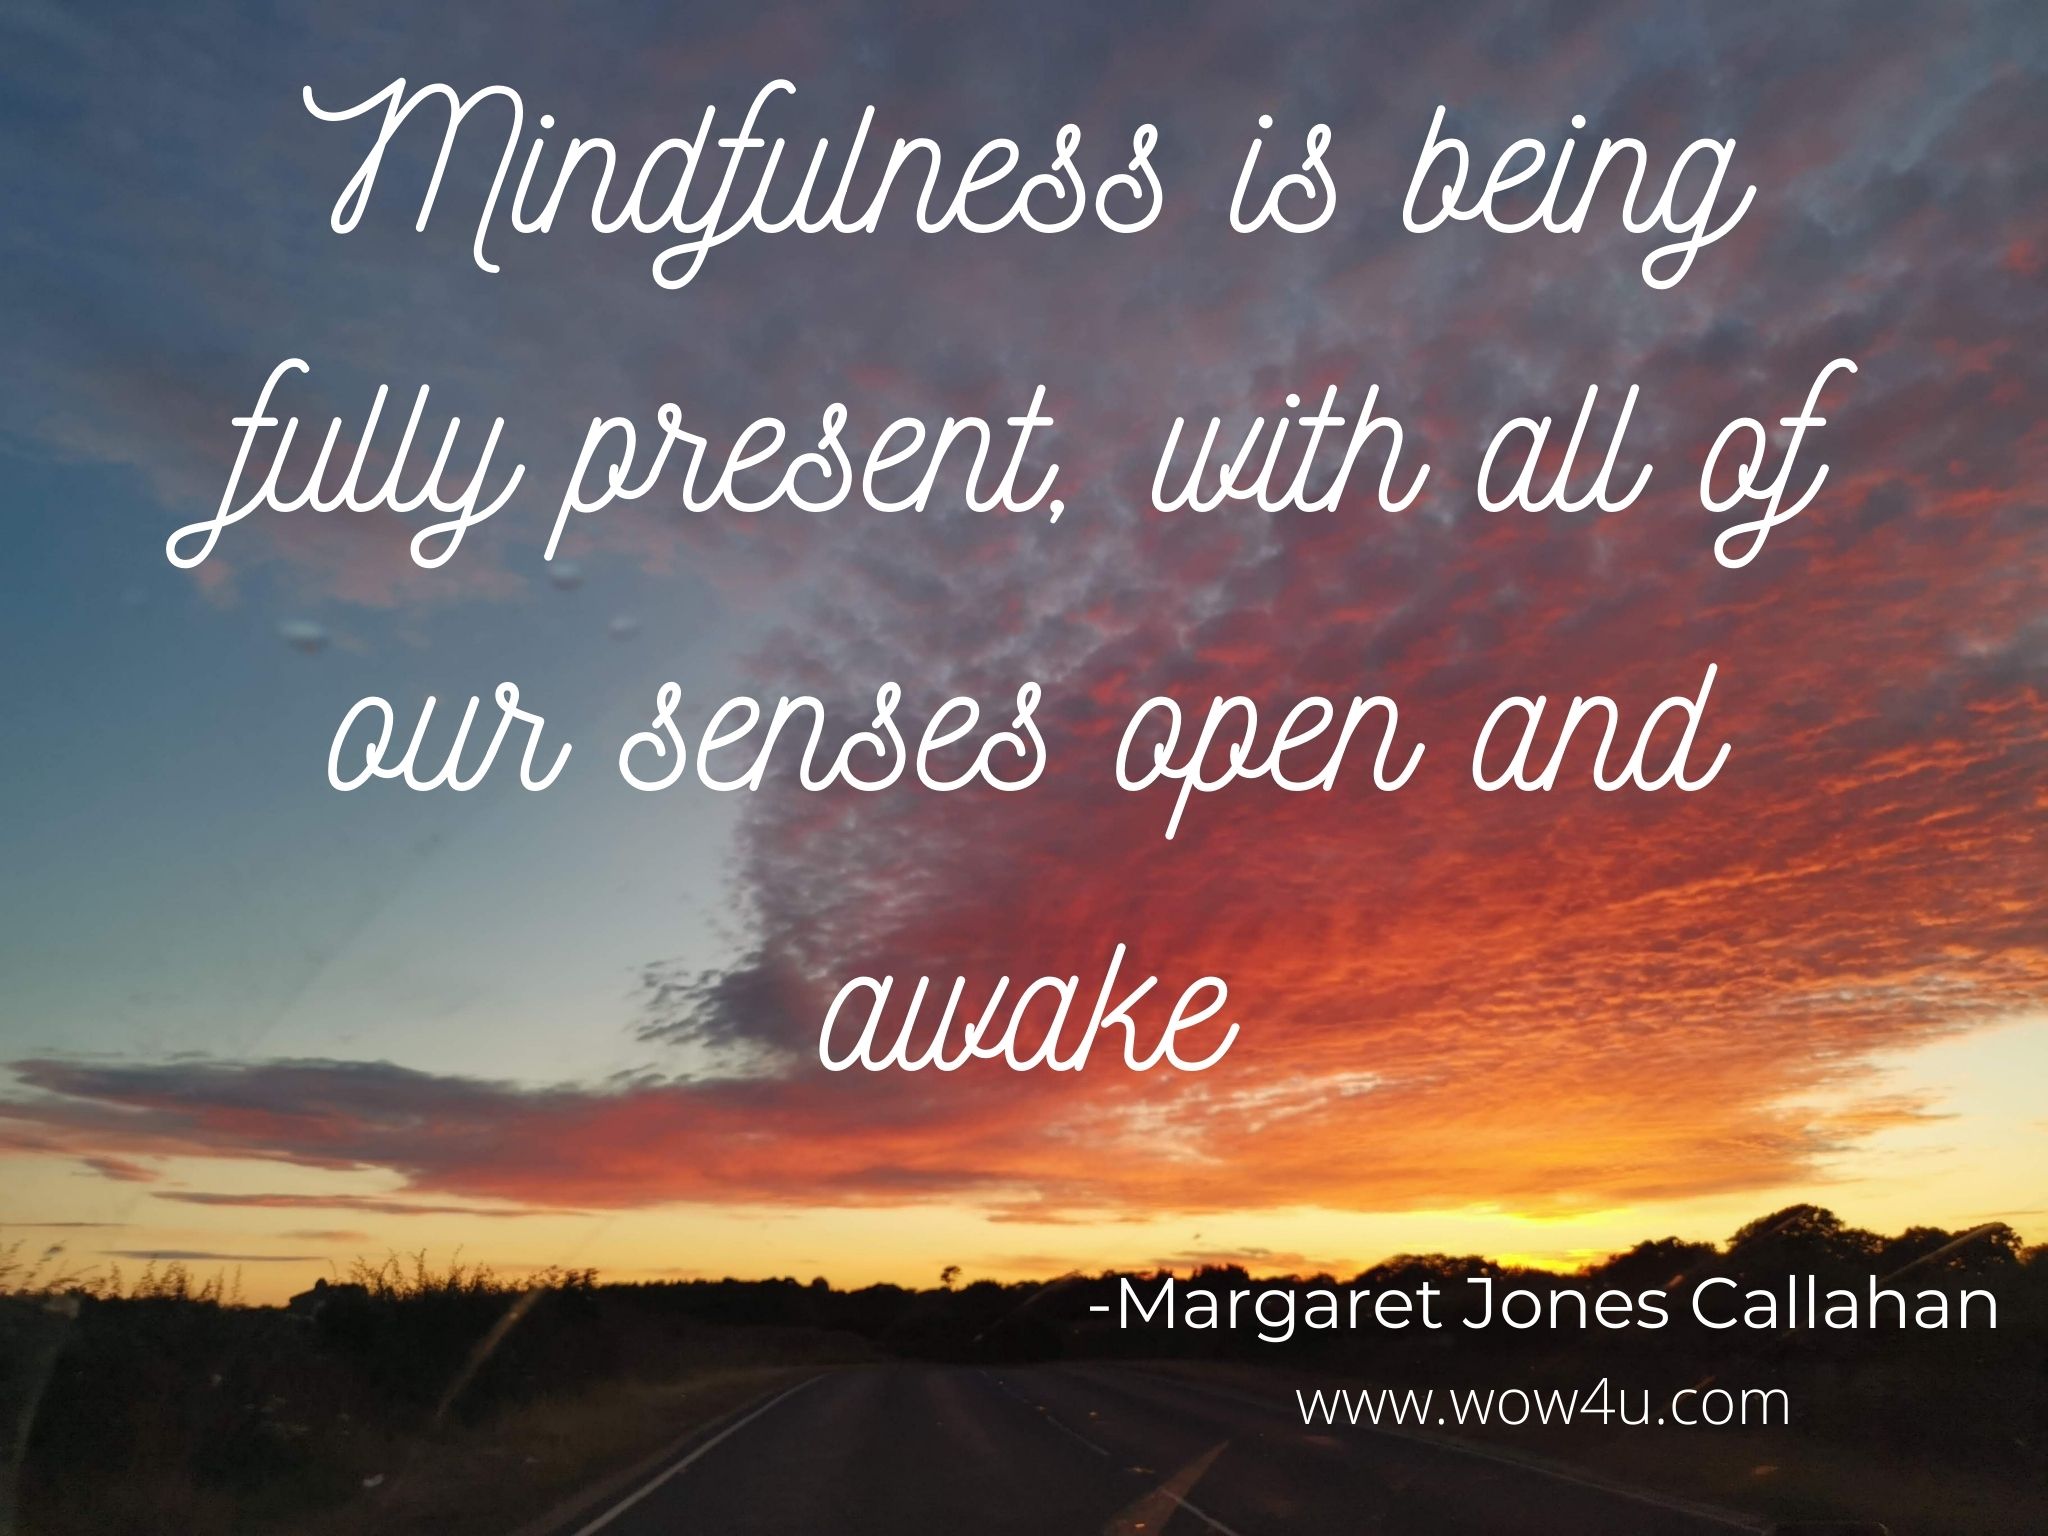  Mindfulness is being fully present, with all of our senses open and awake